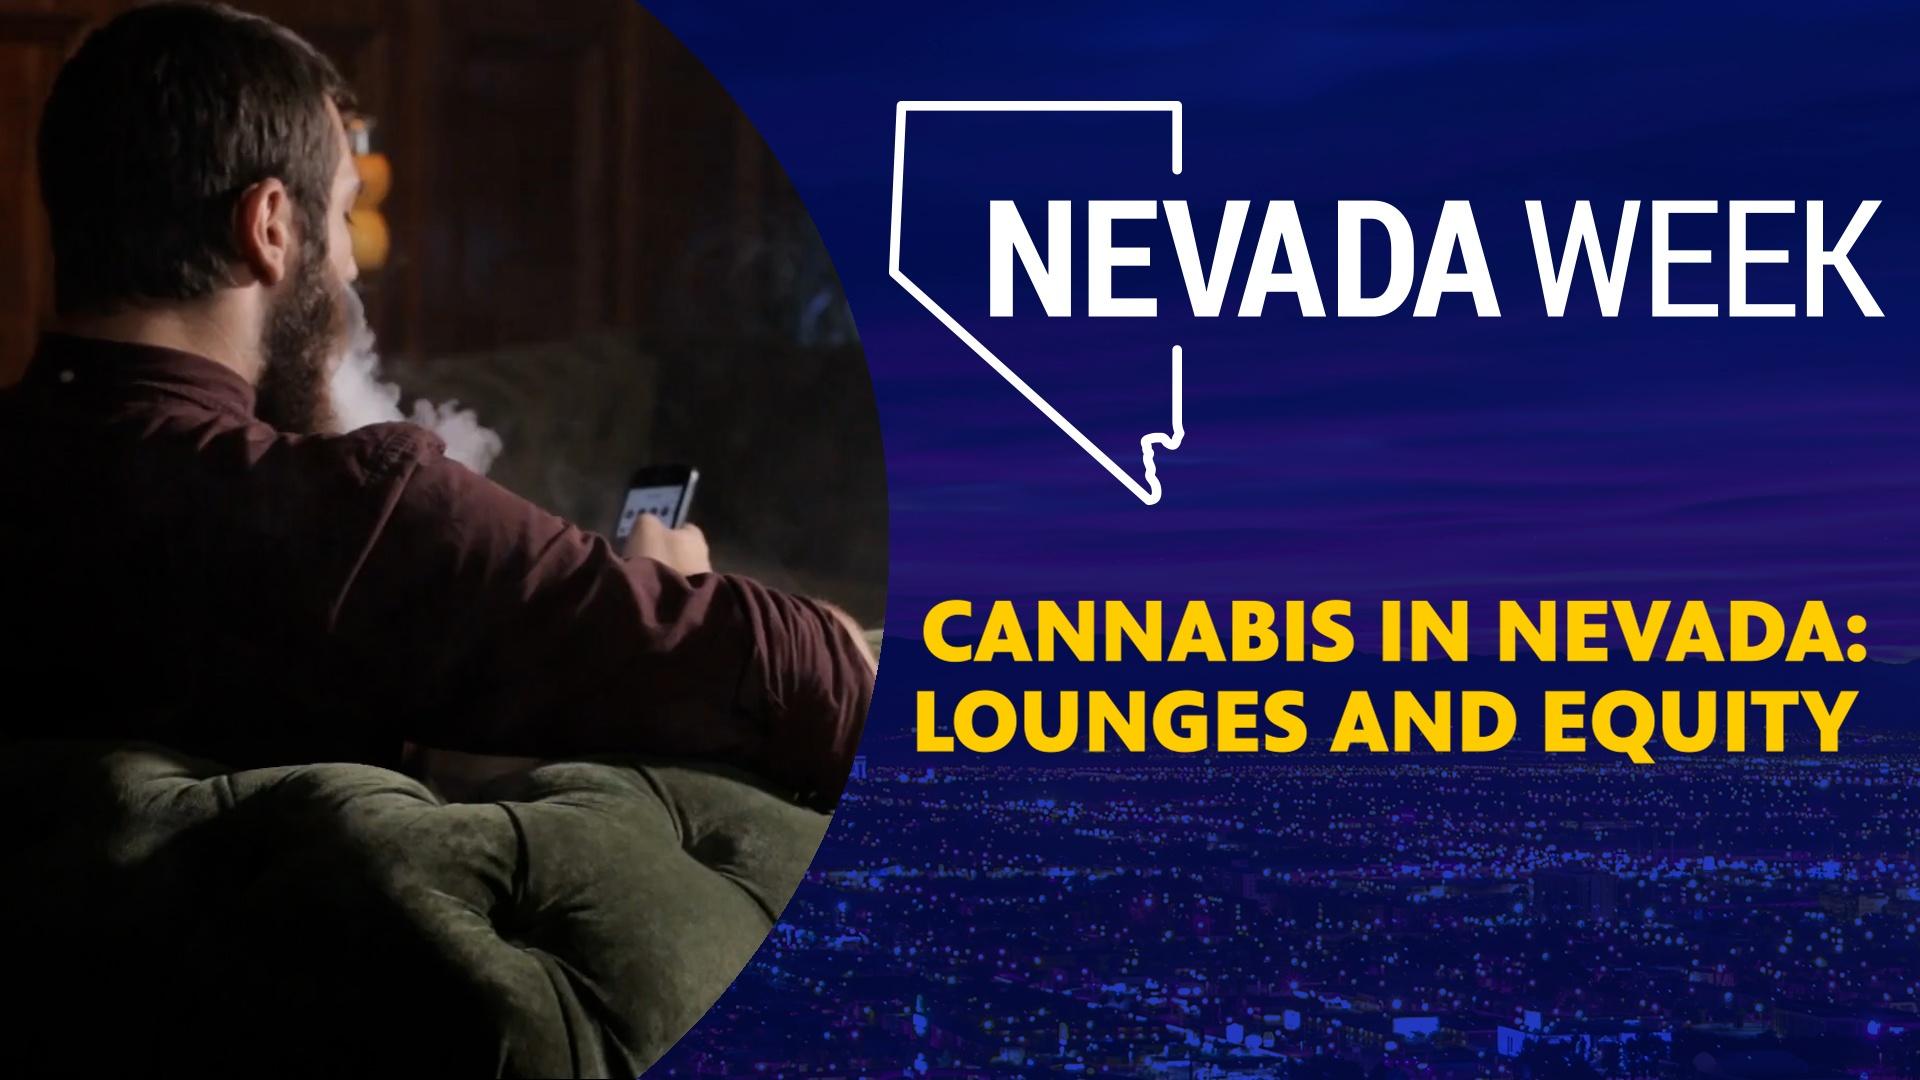 Cannabis in Nevada: Lounges and Equity